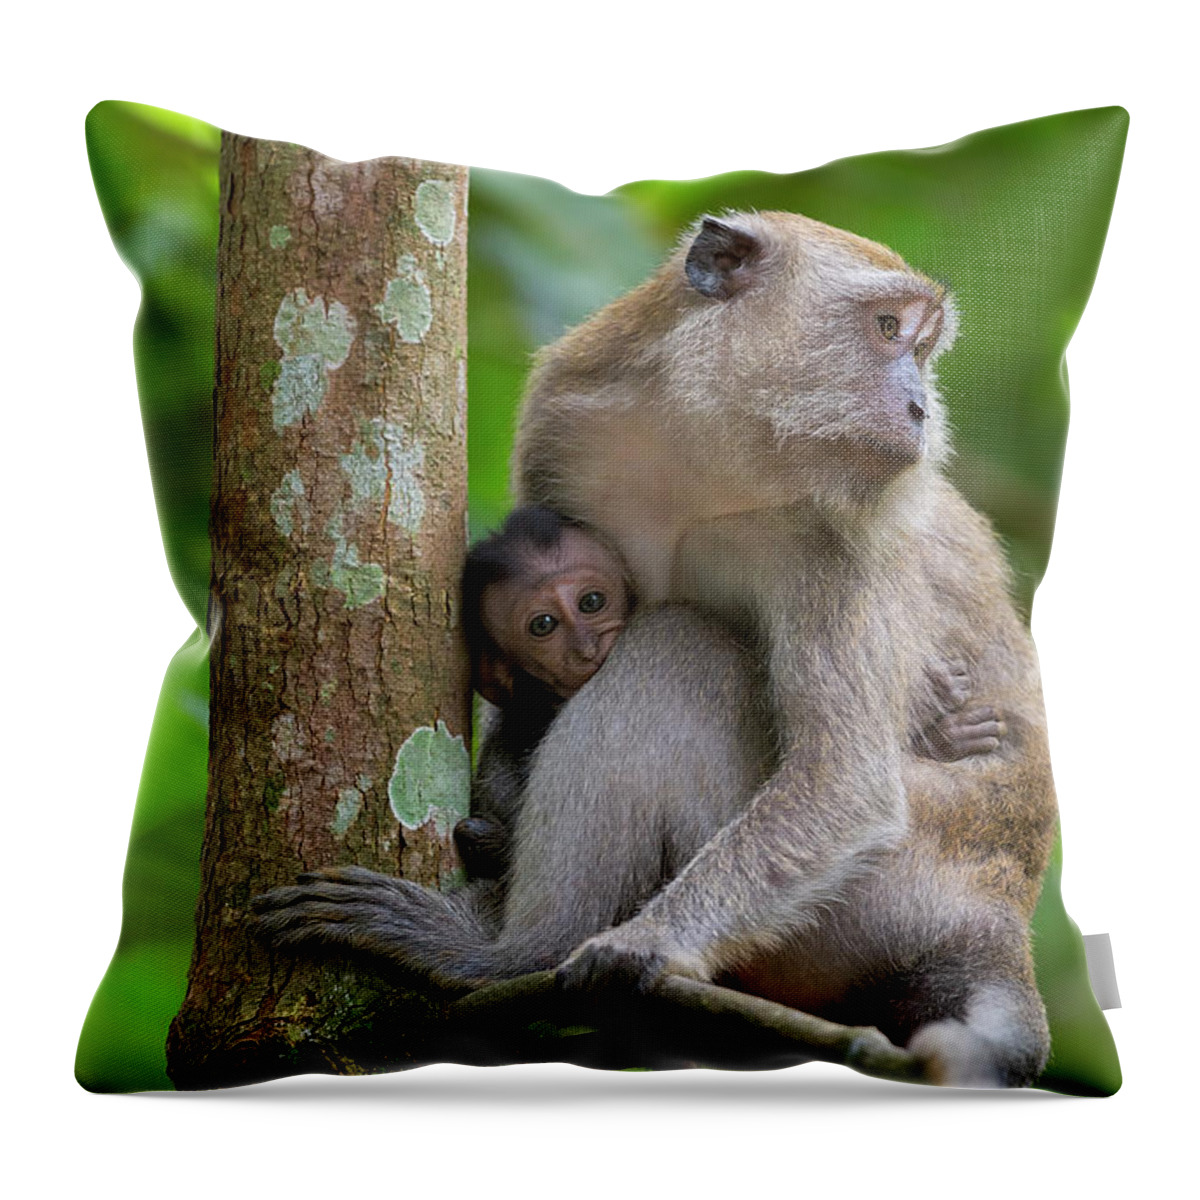 Monkey Throw Pillow featuring the photograph Mother and Baby Monkey by David Gn